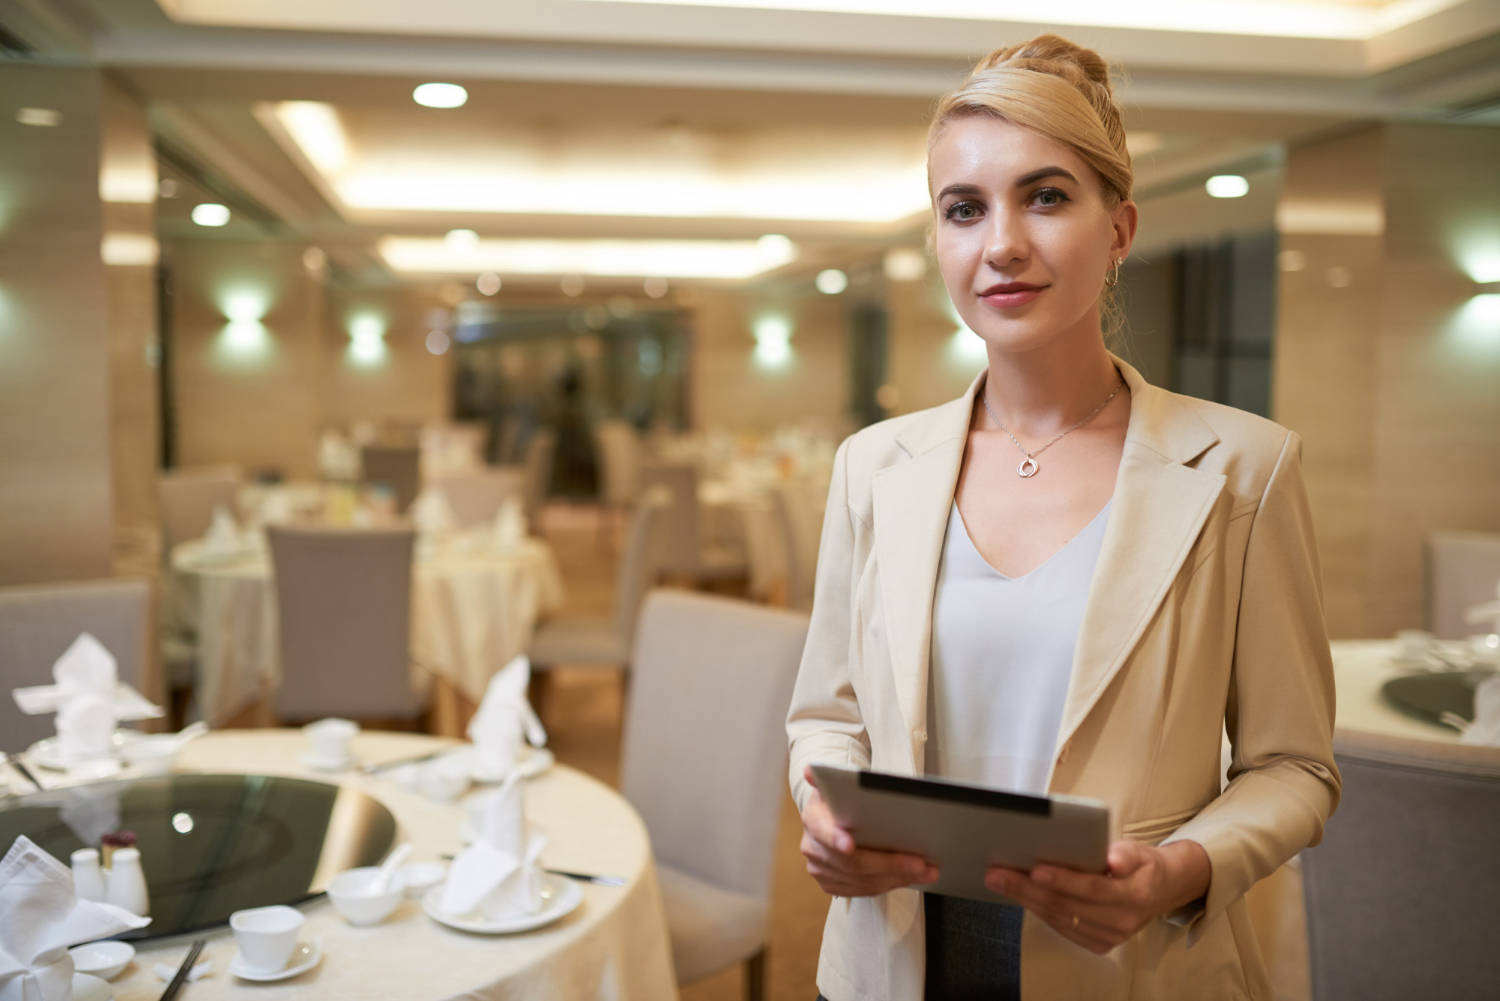 Tips for hiring restaurant managers